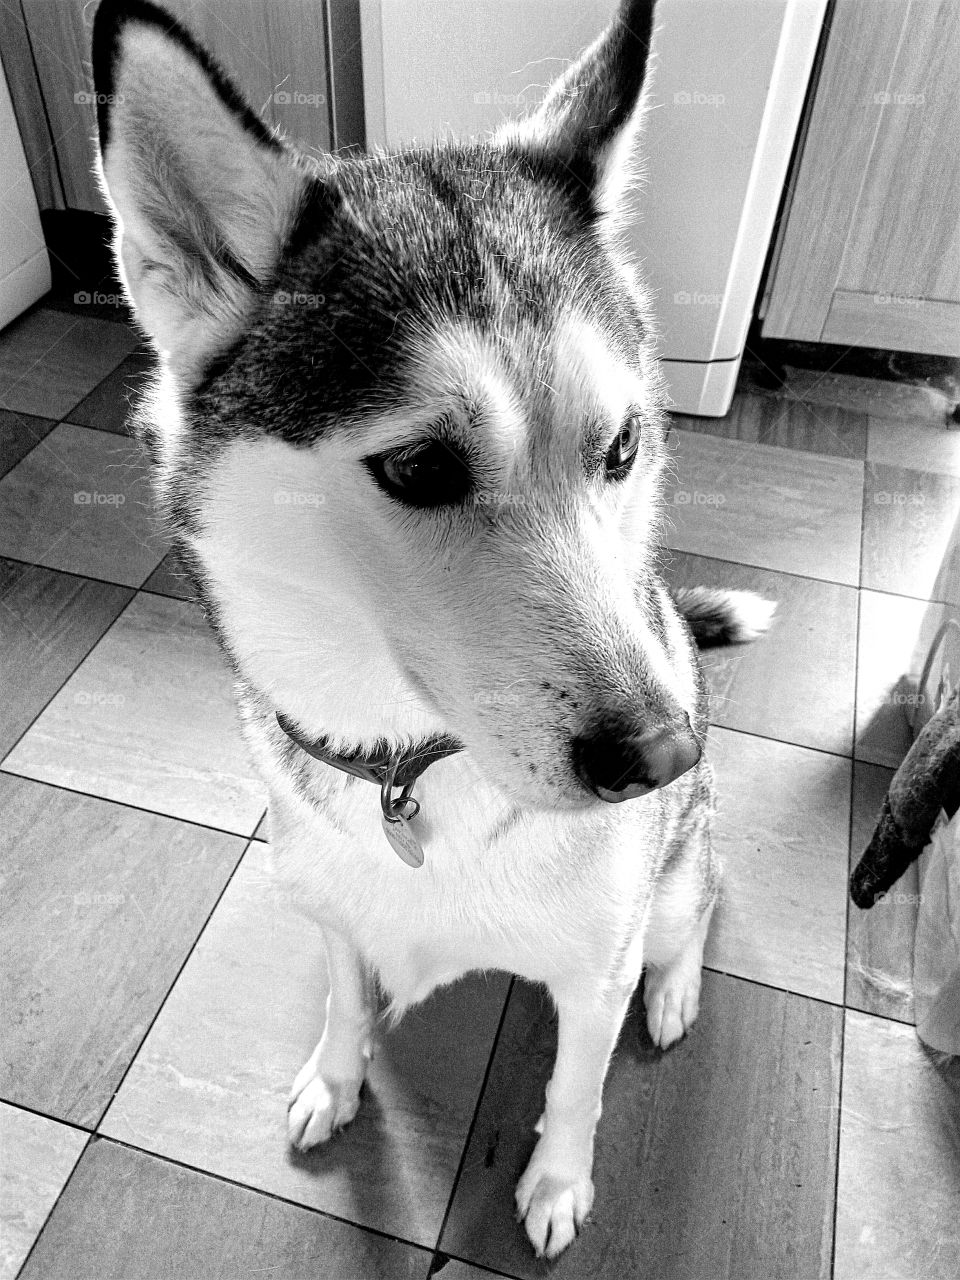 My Siberian husky sitting on my kitchen floor in black and white